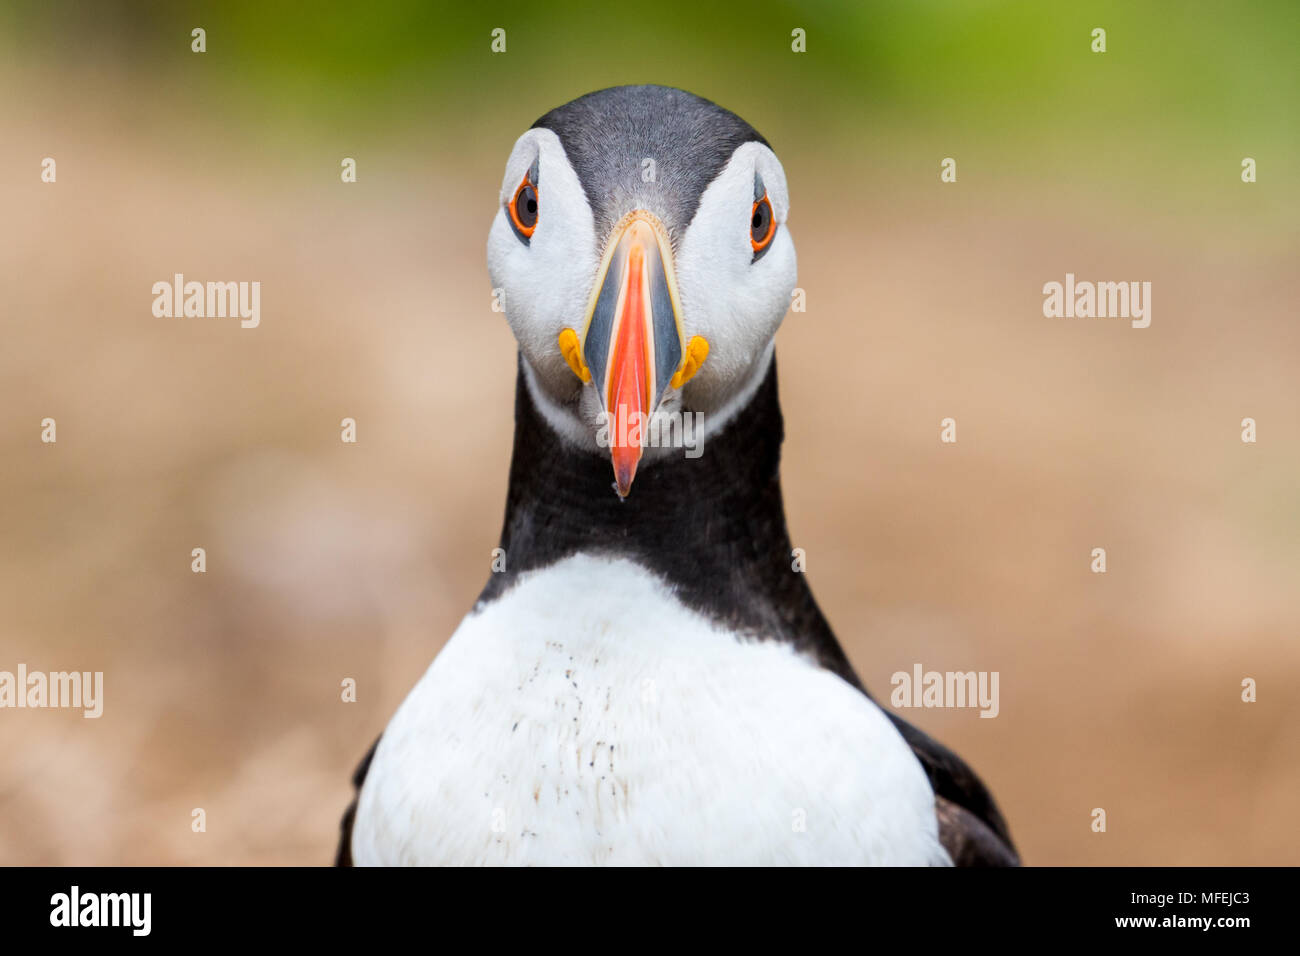 A beautiful young puffin staring with big open eyes into camera Stock Photo